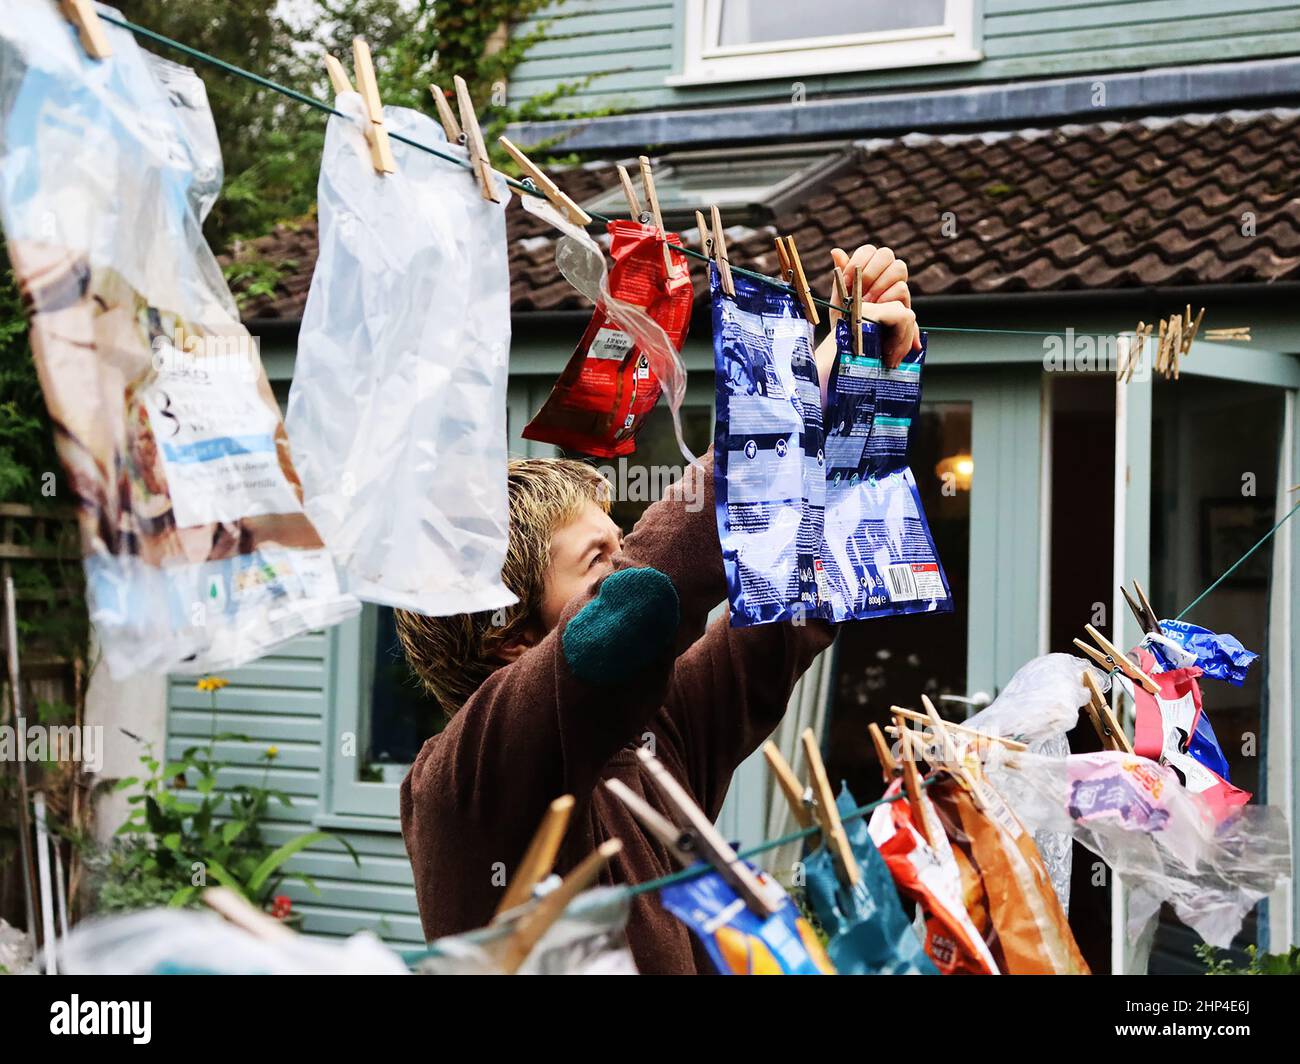 Colour photo of someone hanging plastics on a washing line, inspired by responses to climate change. Stock Photo